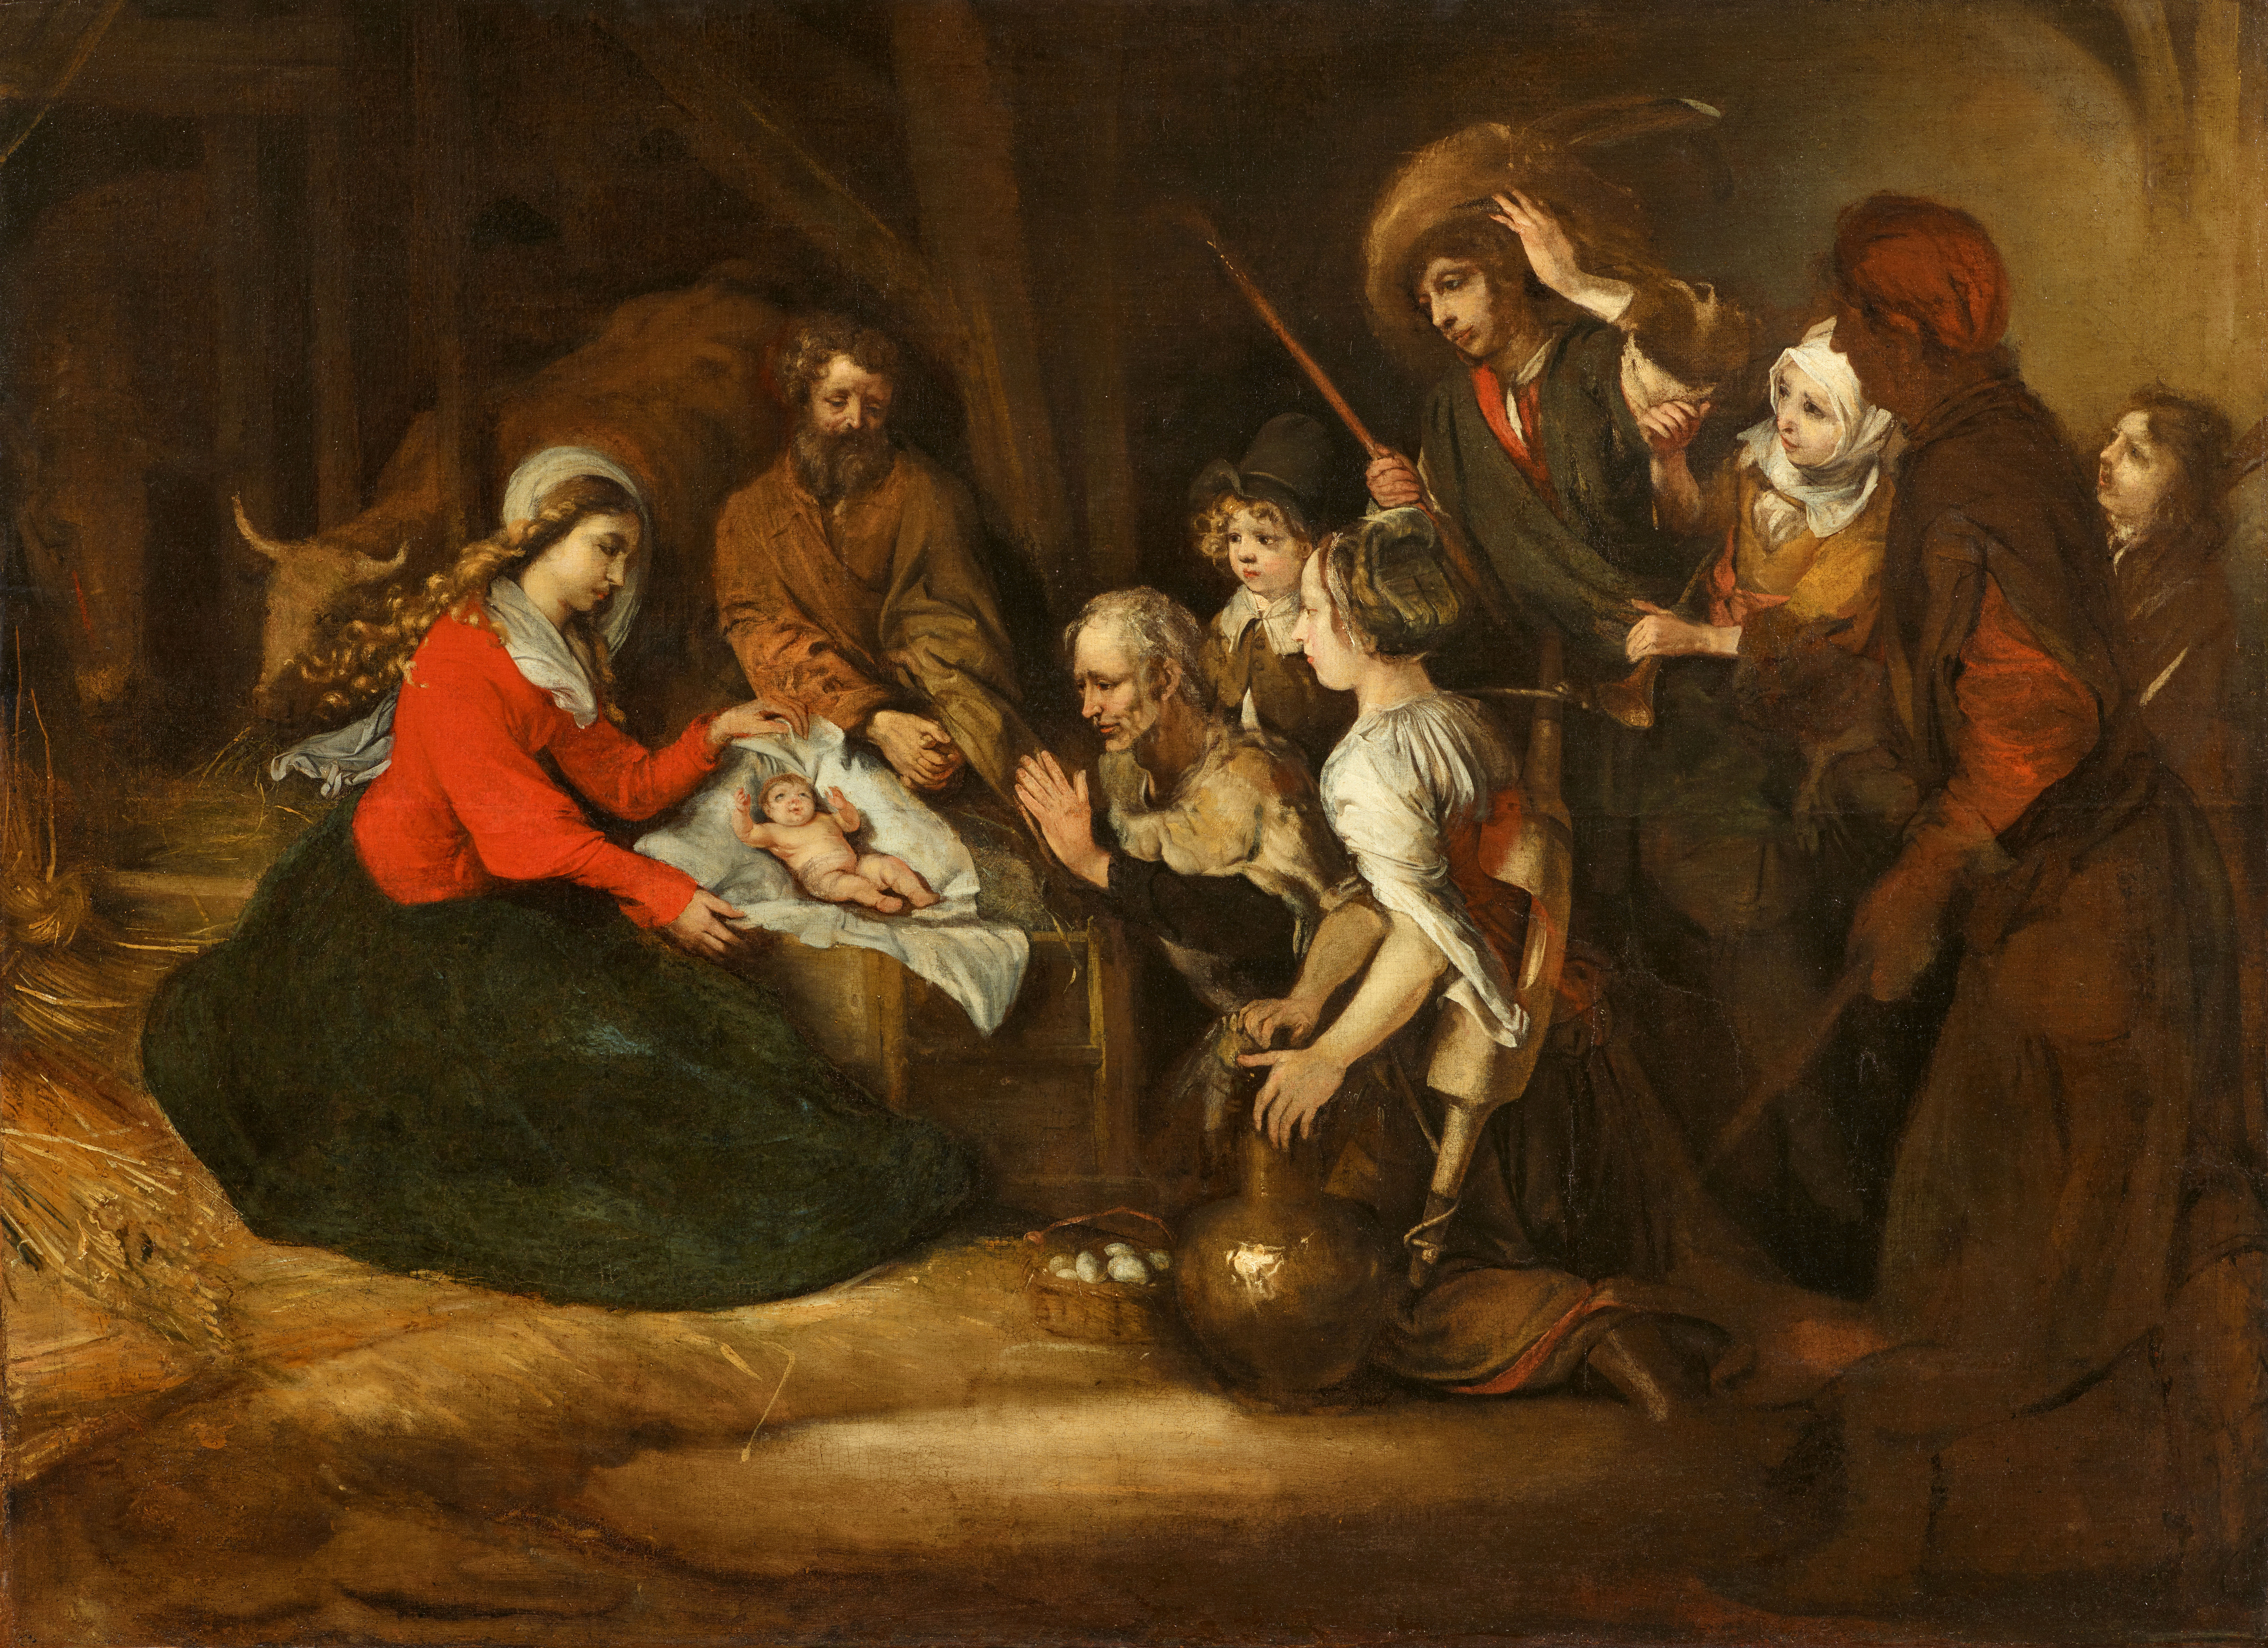 Barent Fabritius - The Adoration of the Shepherds - image-1